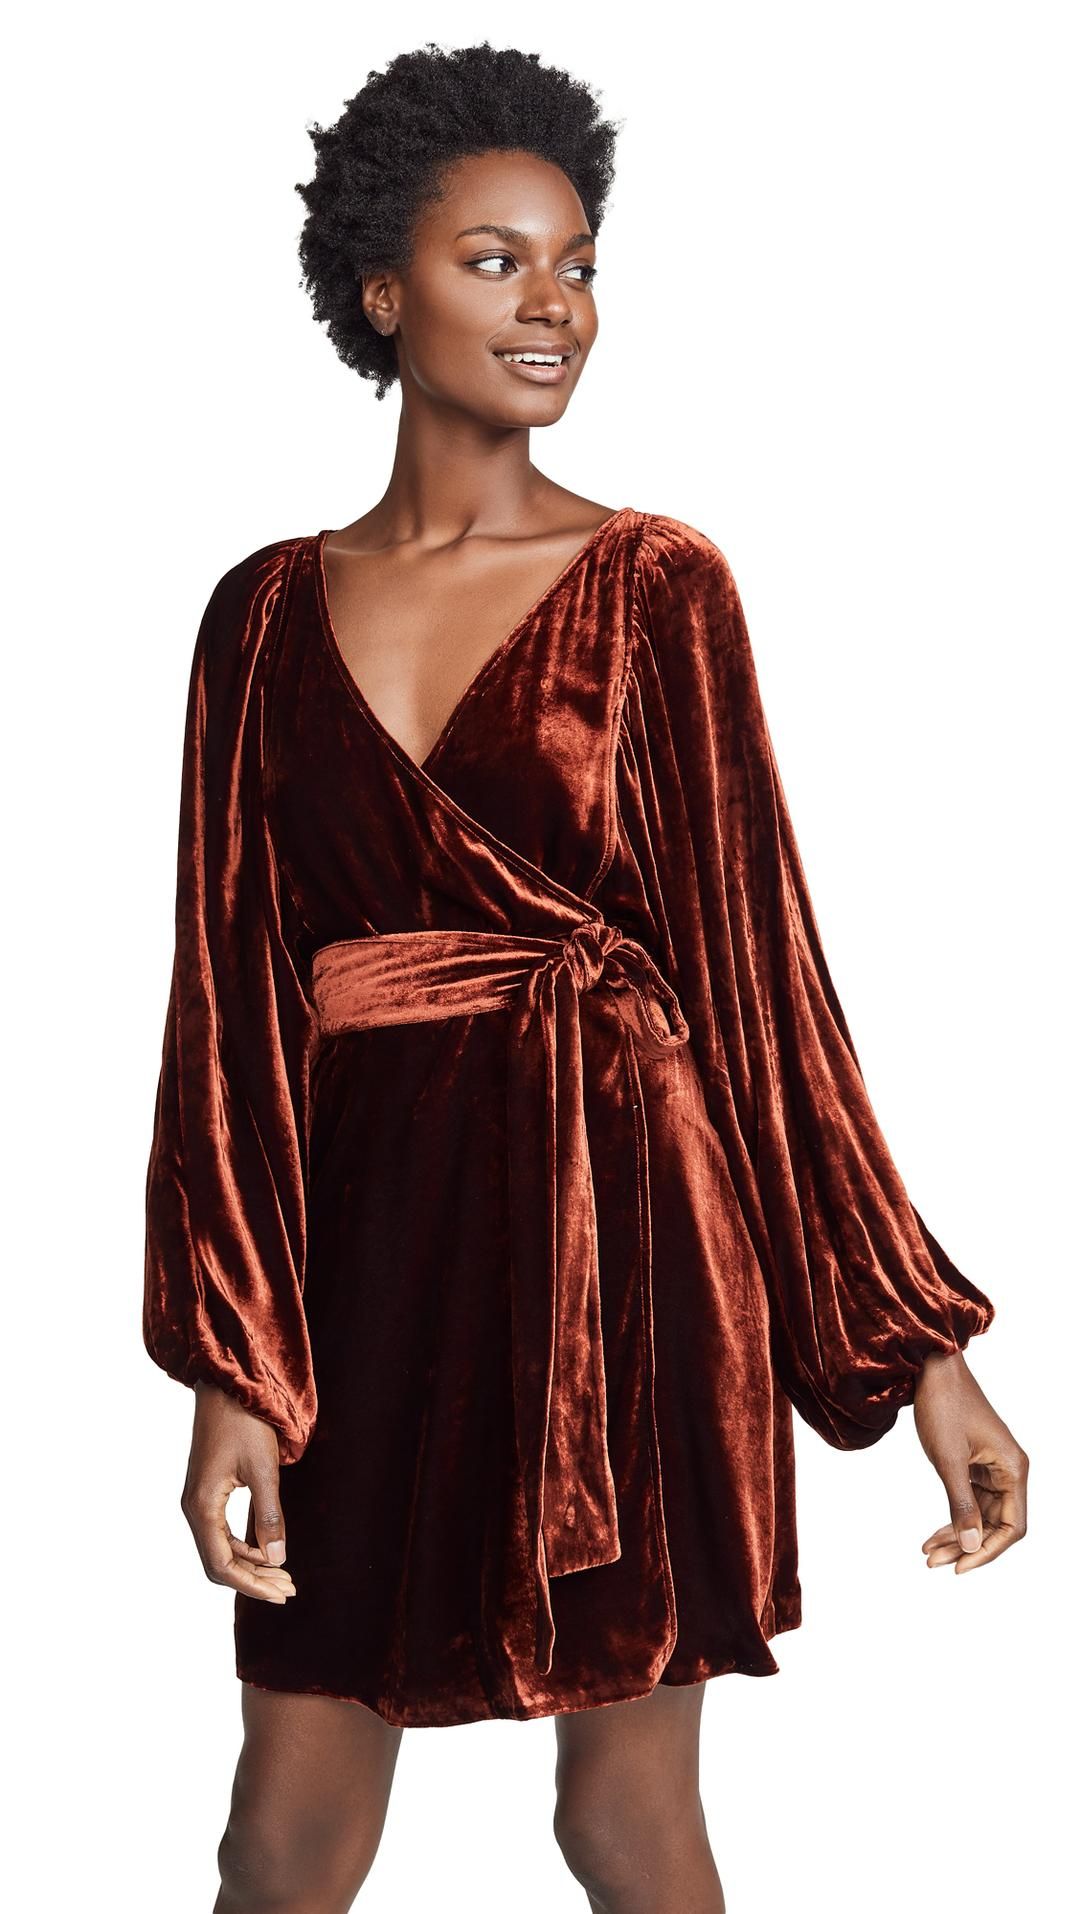 17 Long-Sleeve Cocktail Dresses to Wear This Party Season | Who What Wear